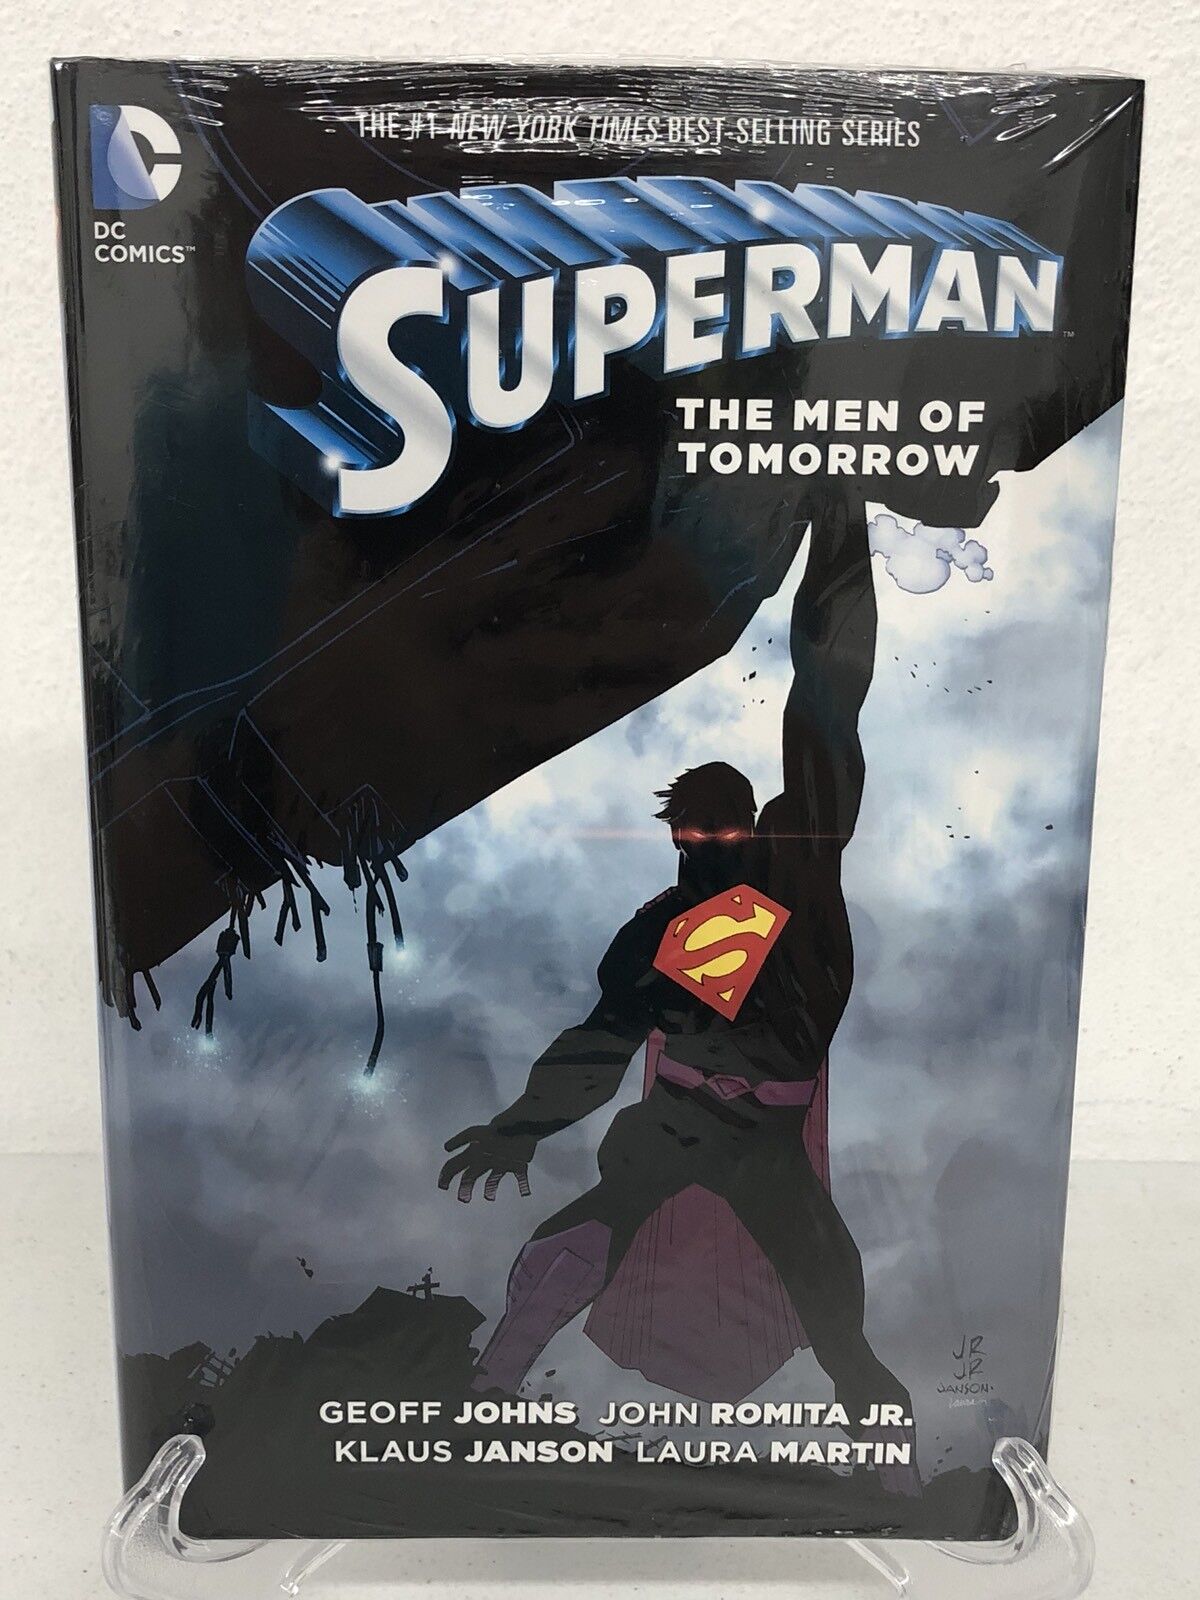 Superman The Men of Tomorrow Collects #32-39 DC Comics Hard Cover HC New Sealed